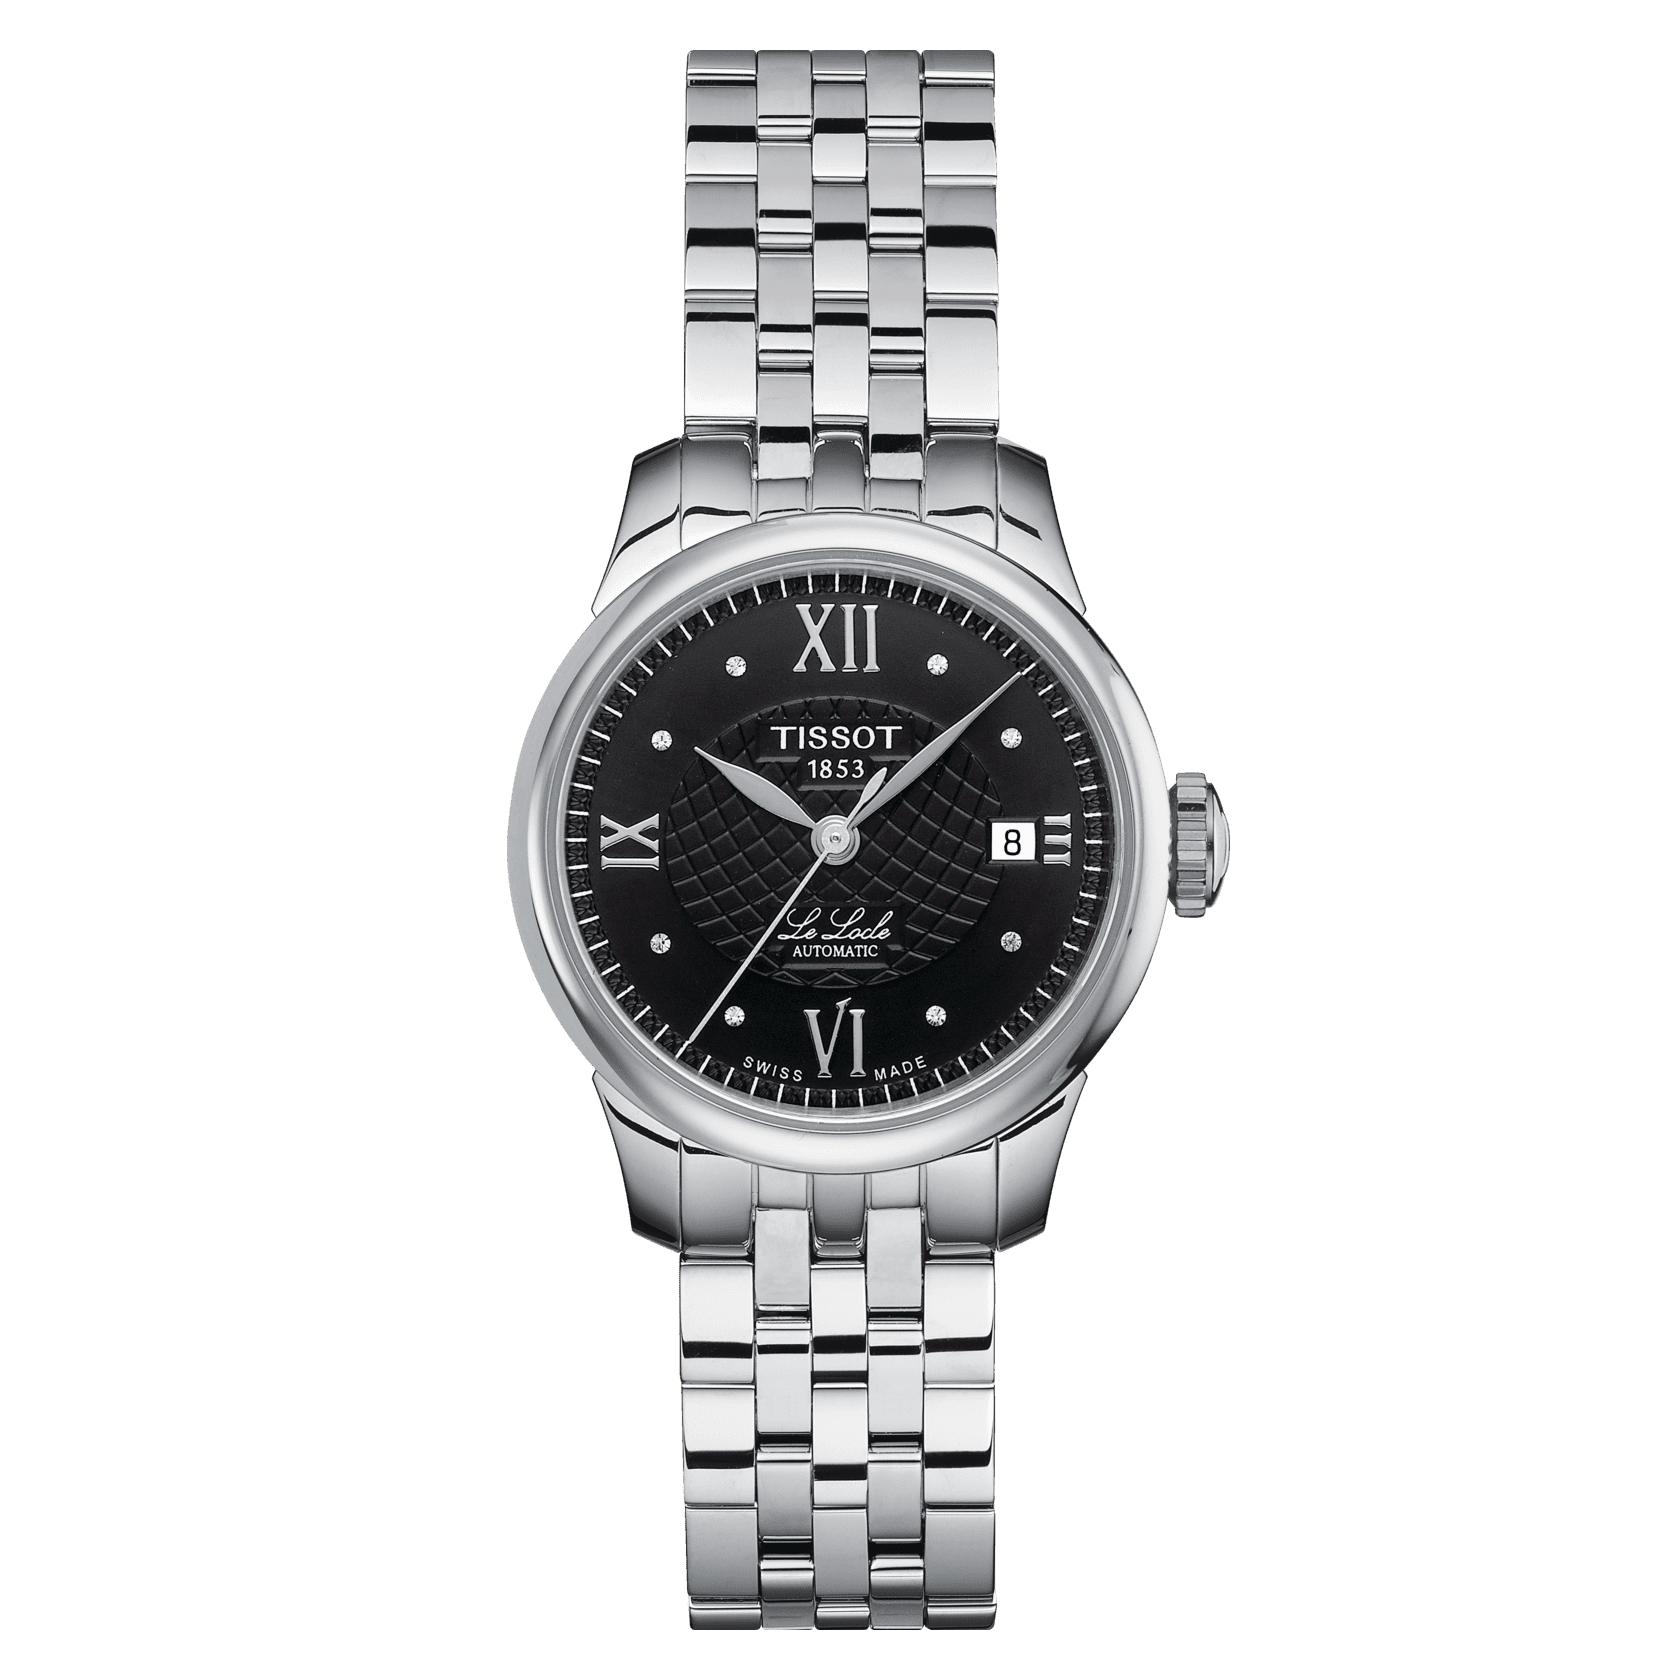 Replica Watches For Sale In Sites Sites